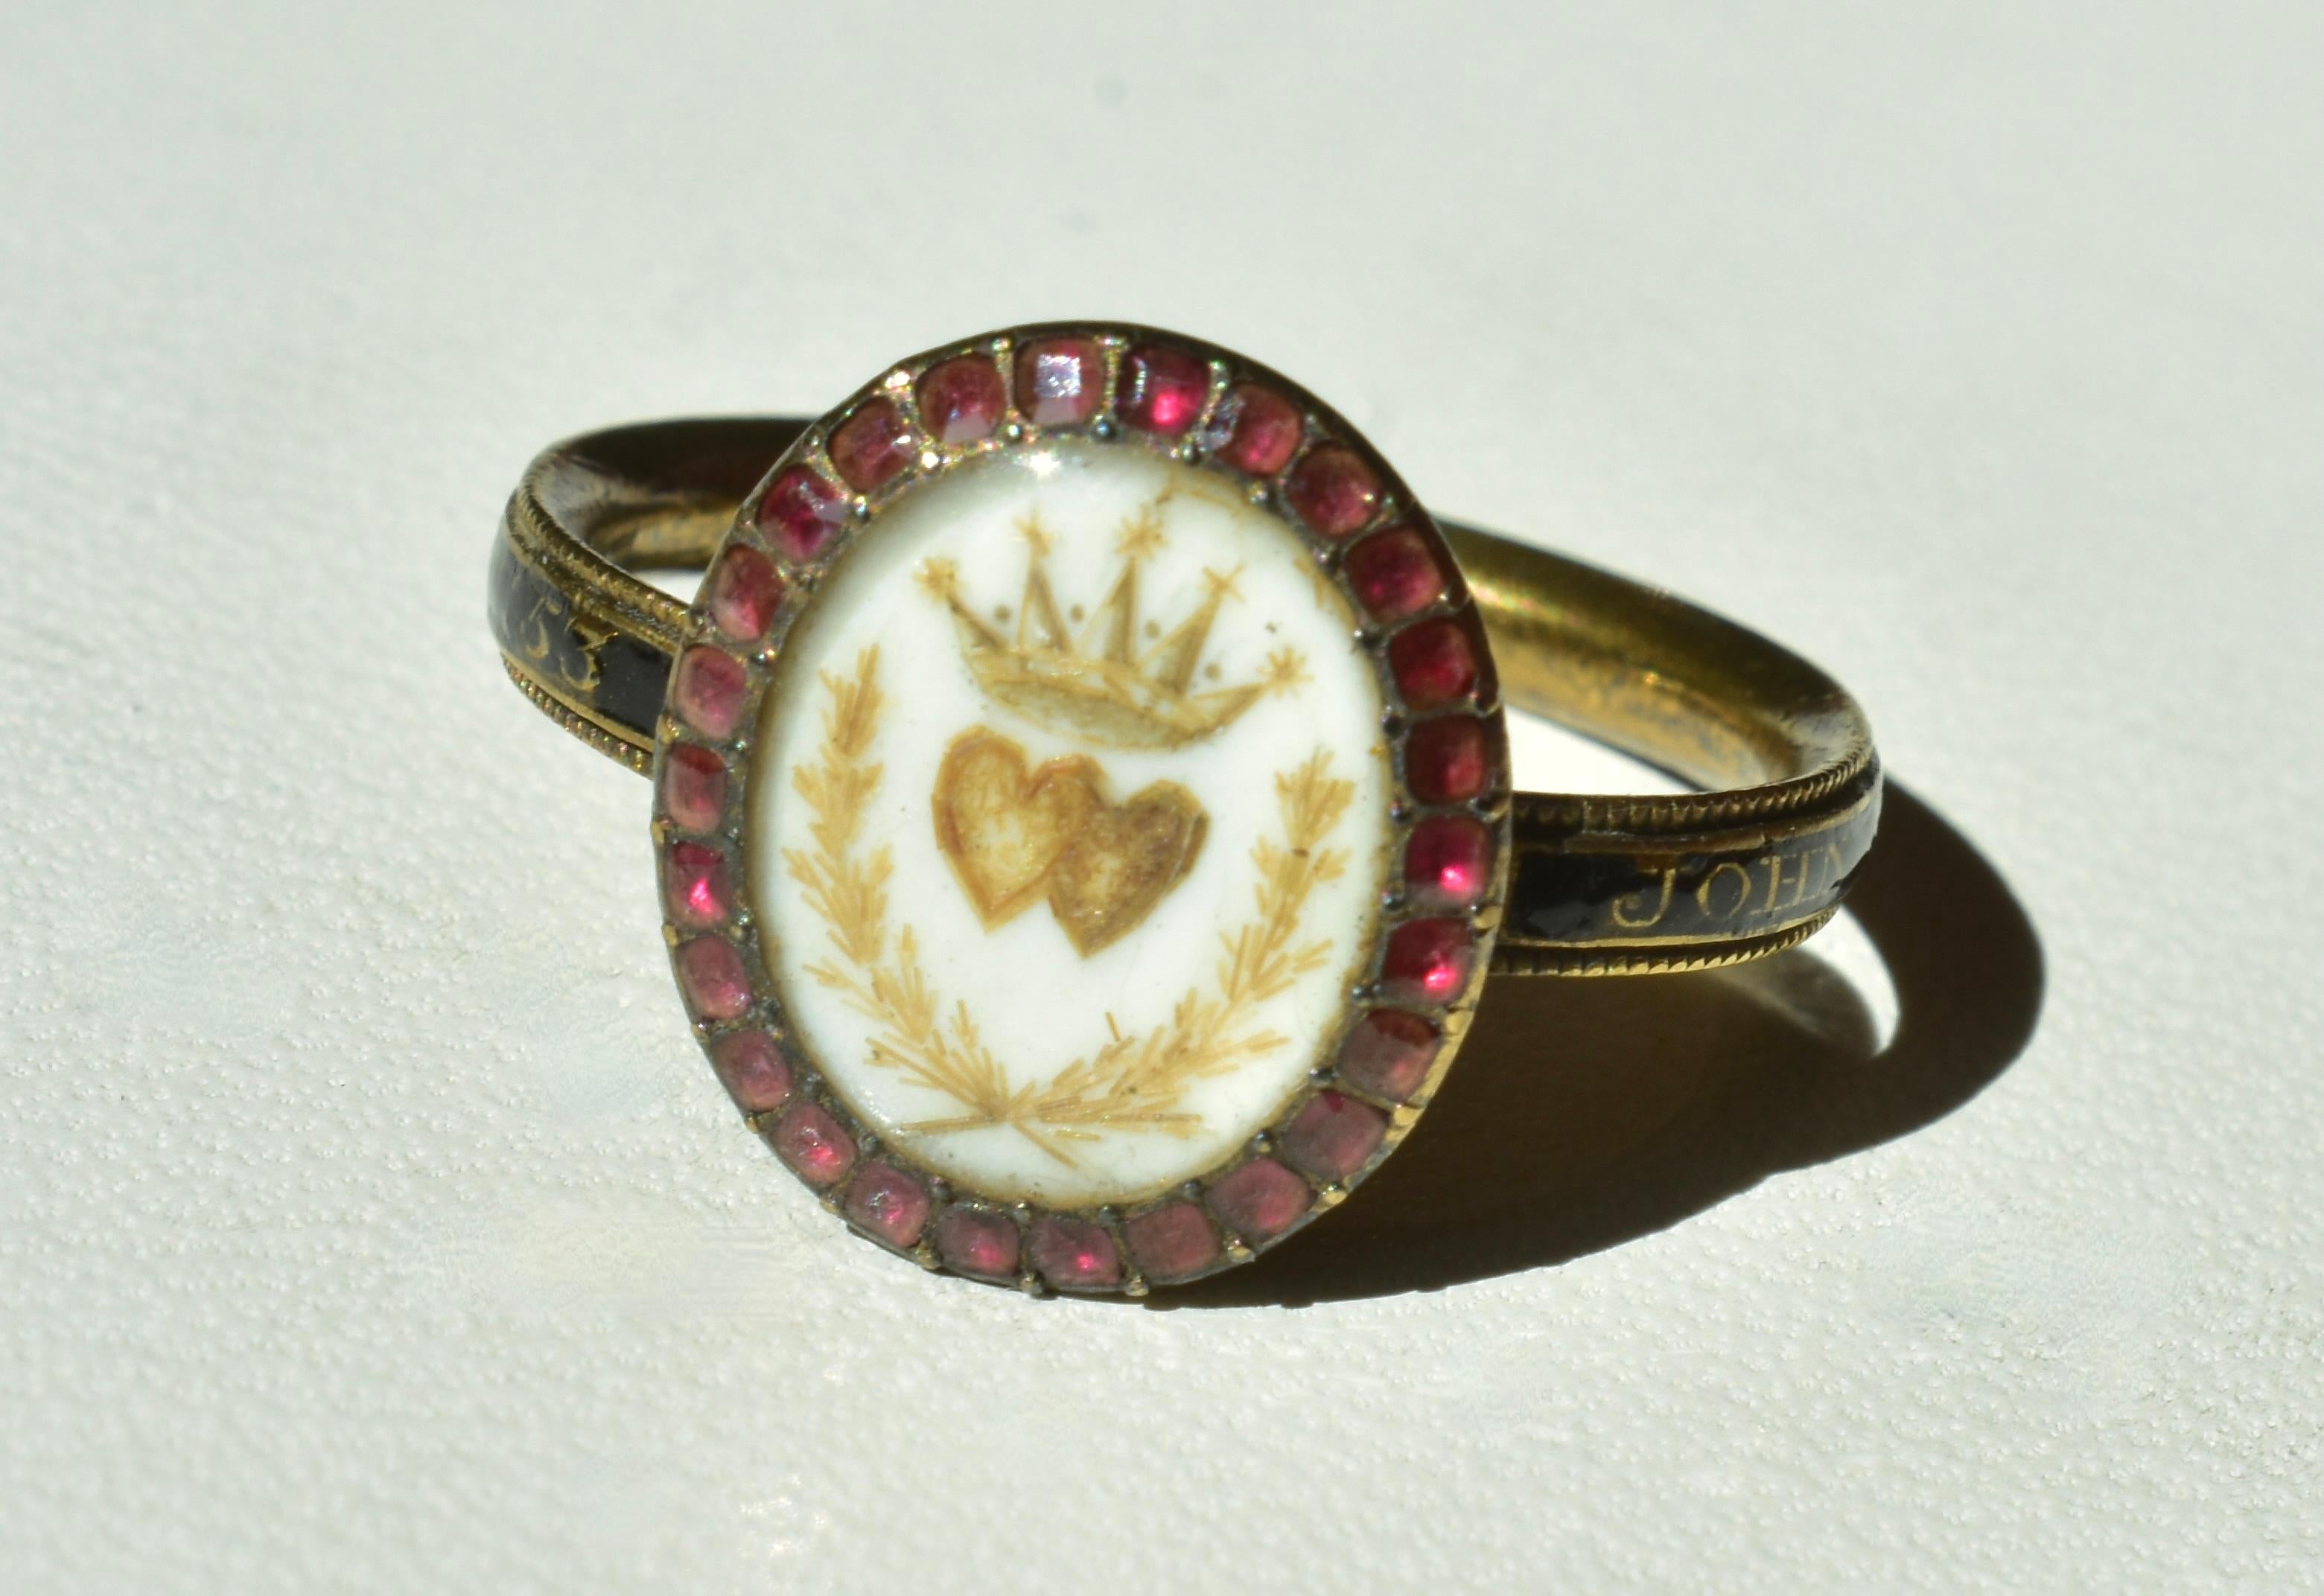 George II 18th Century 18K Memorial Ring Centering Two Hearts & Surround by Garnets Amer. 